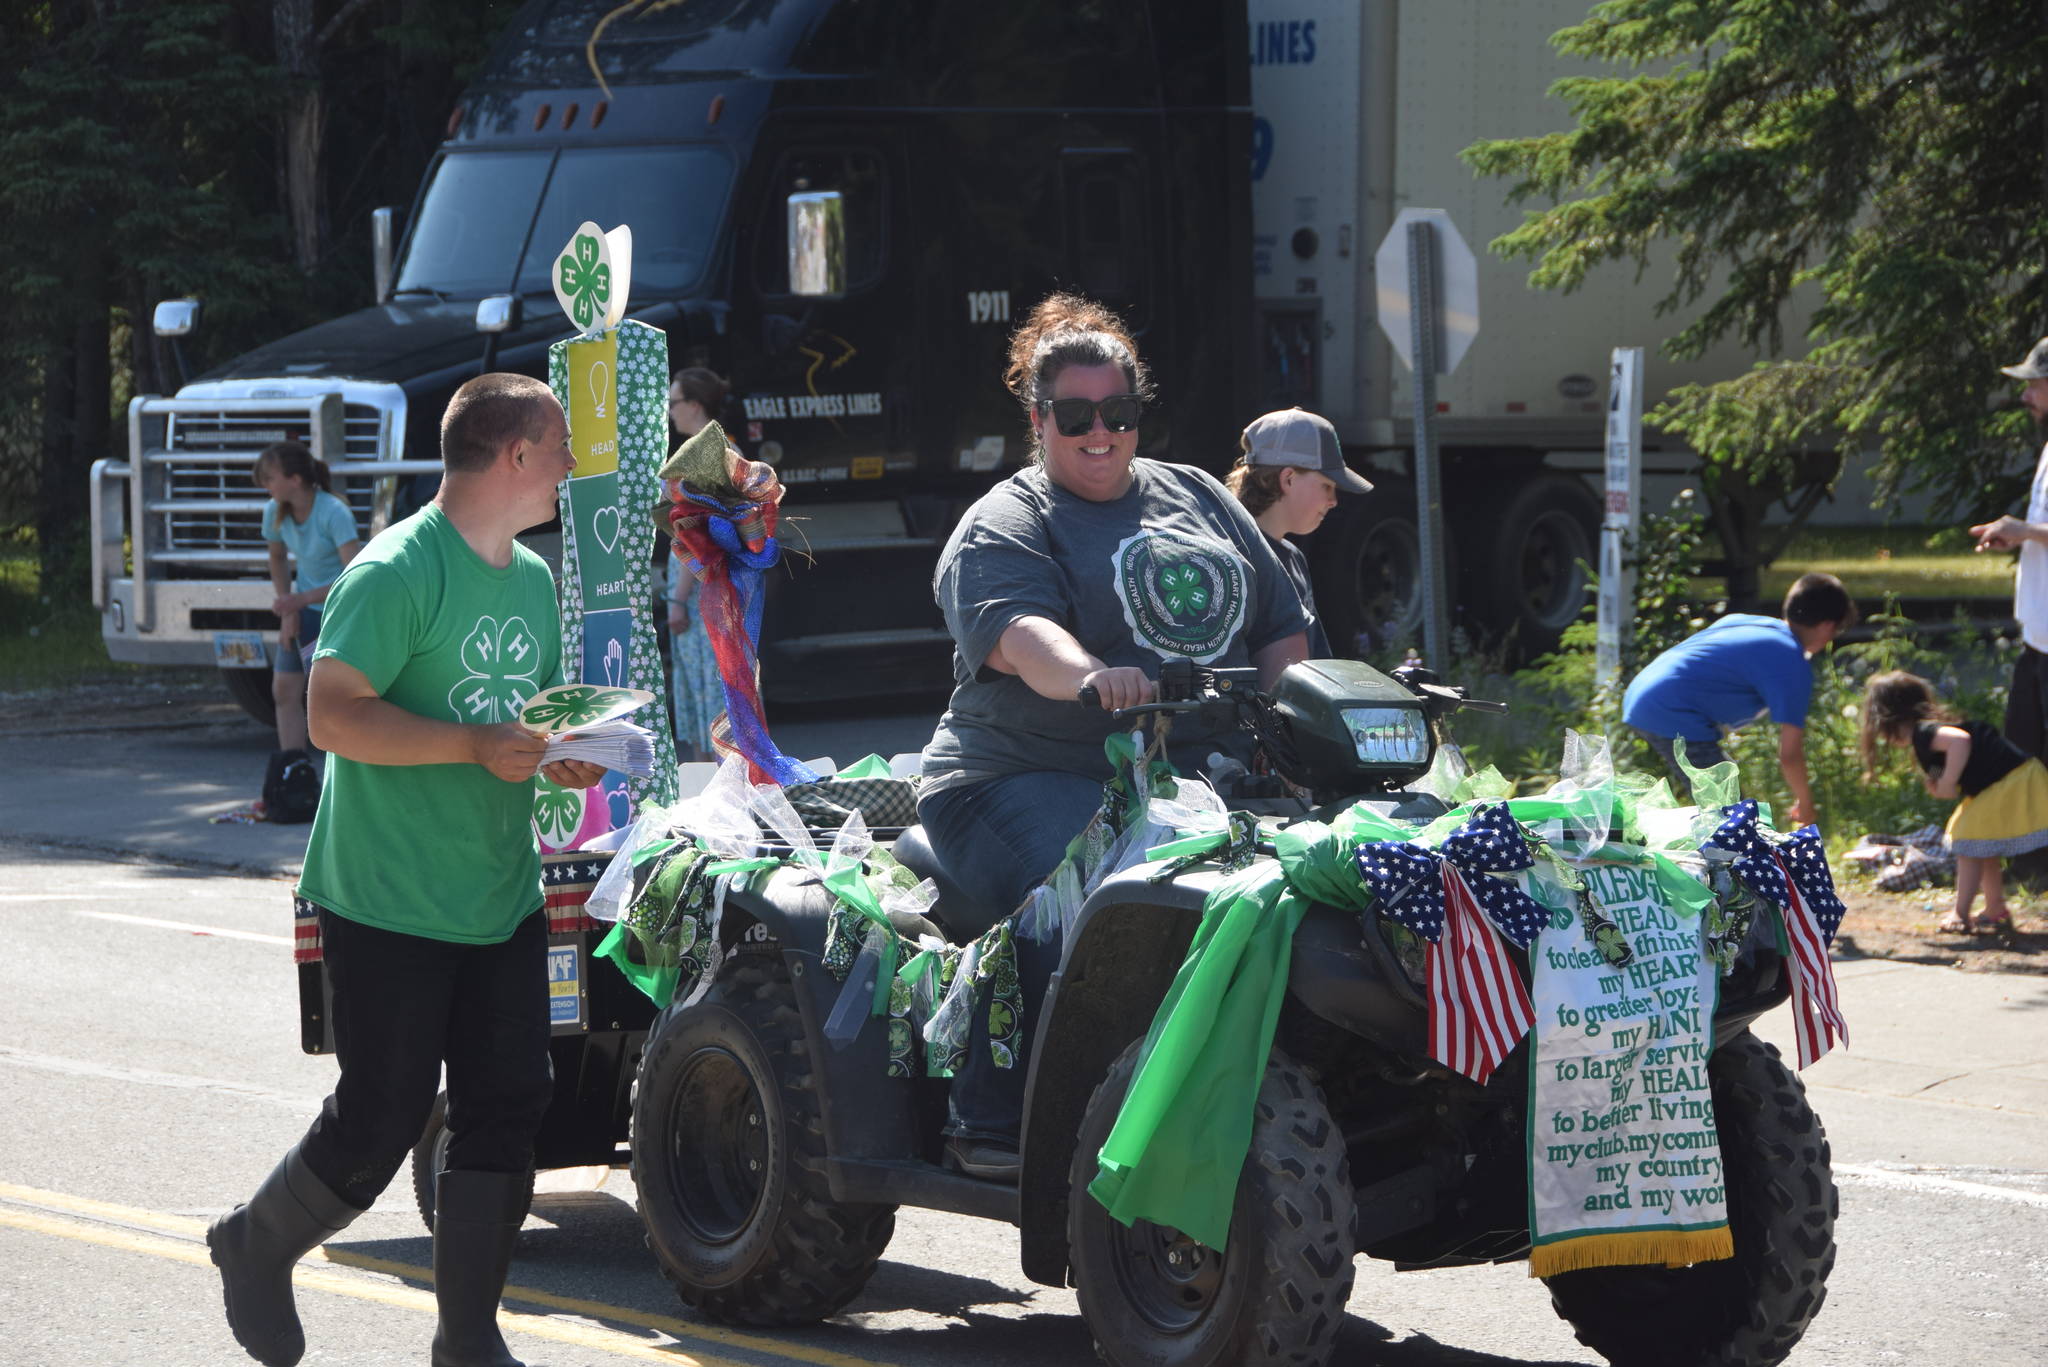 Volunteers with the local 4-H Chapter share a laugh during the July 4th parade in Kenai, Alaska. (Photo by Brian Mazurek/Peninsula Clarion)